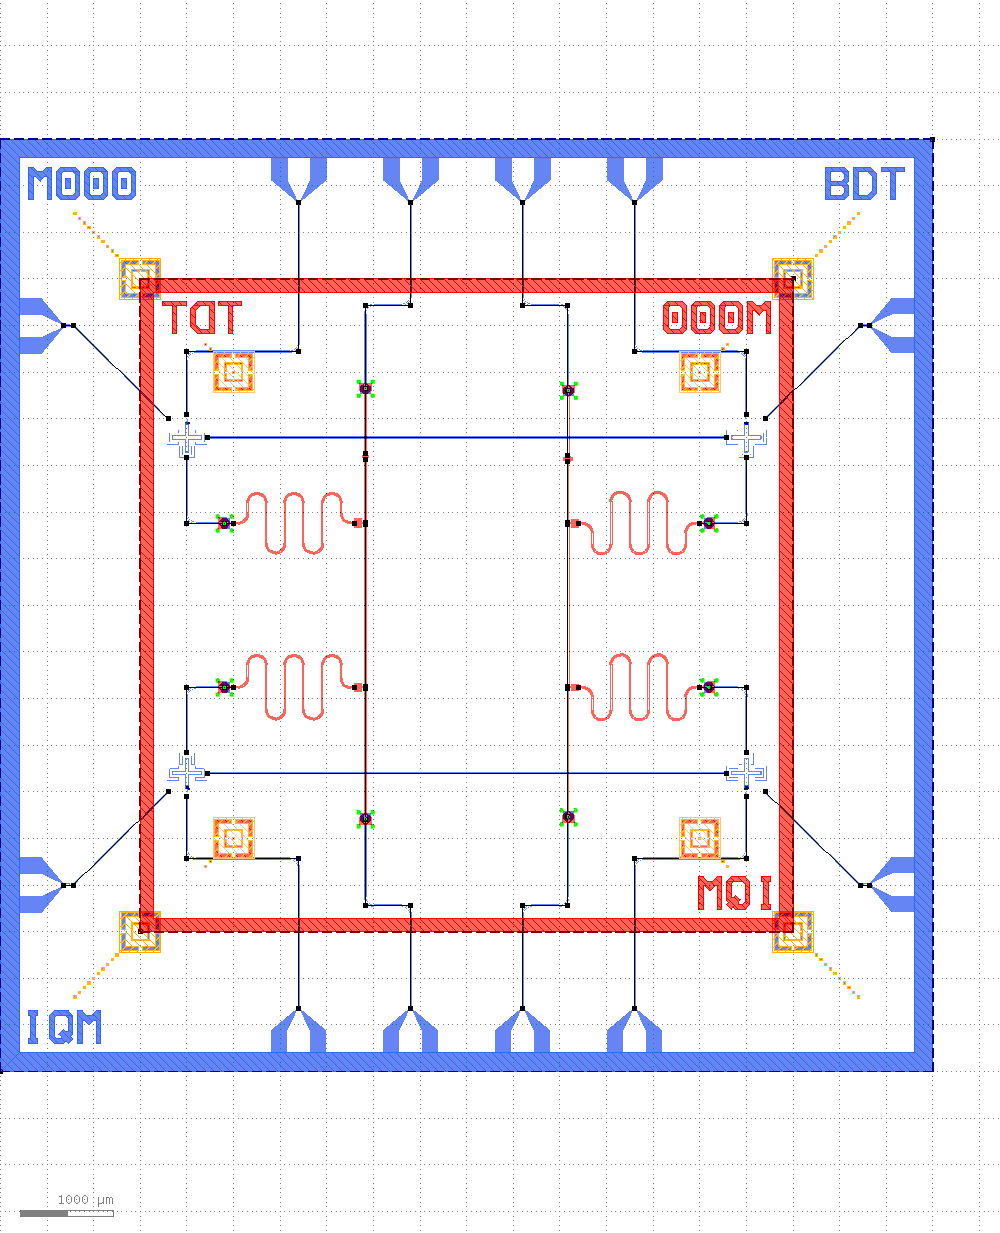 ../_images/kqcircuits.chips.demo_twoface.png